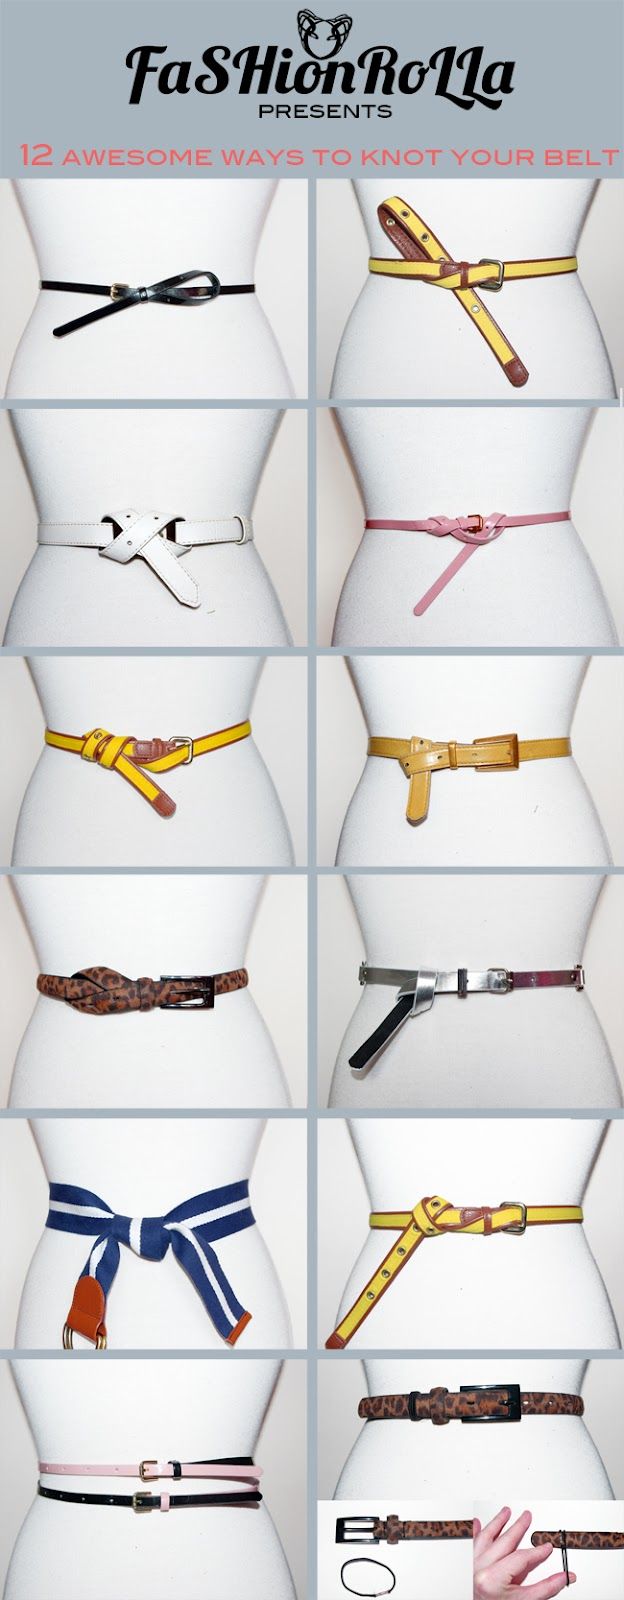 Very insightful! How to tie a belt 12 different ways :)